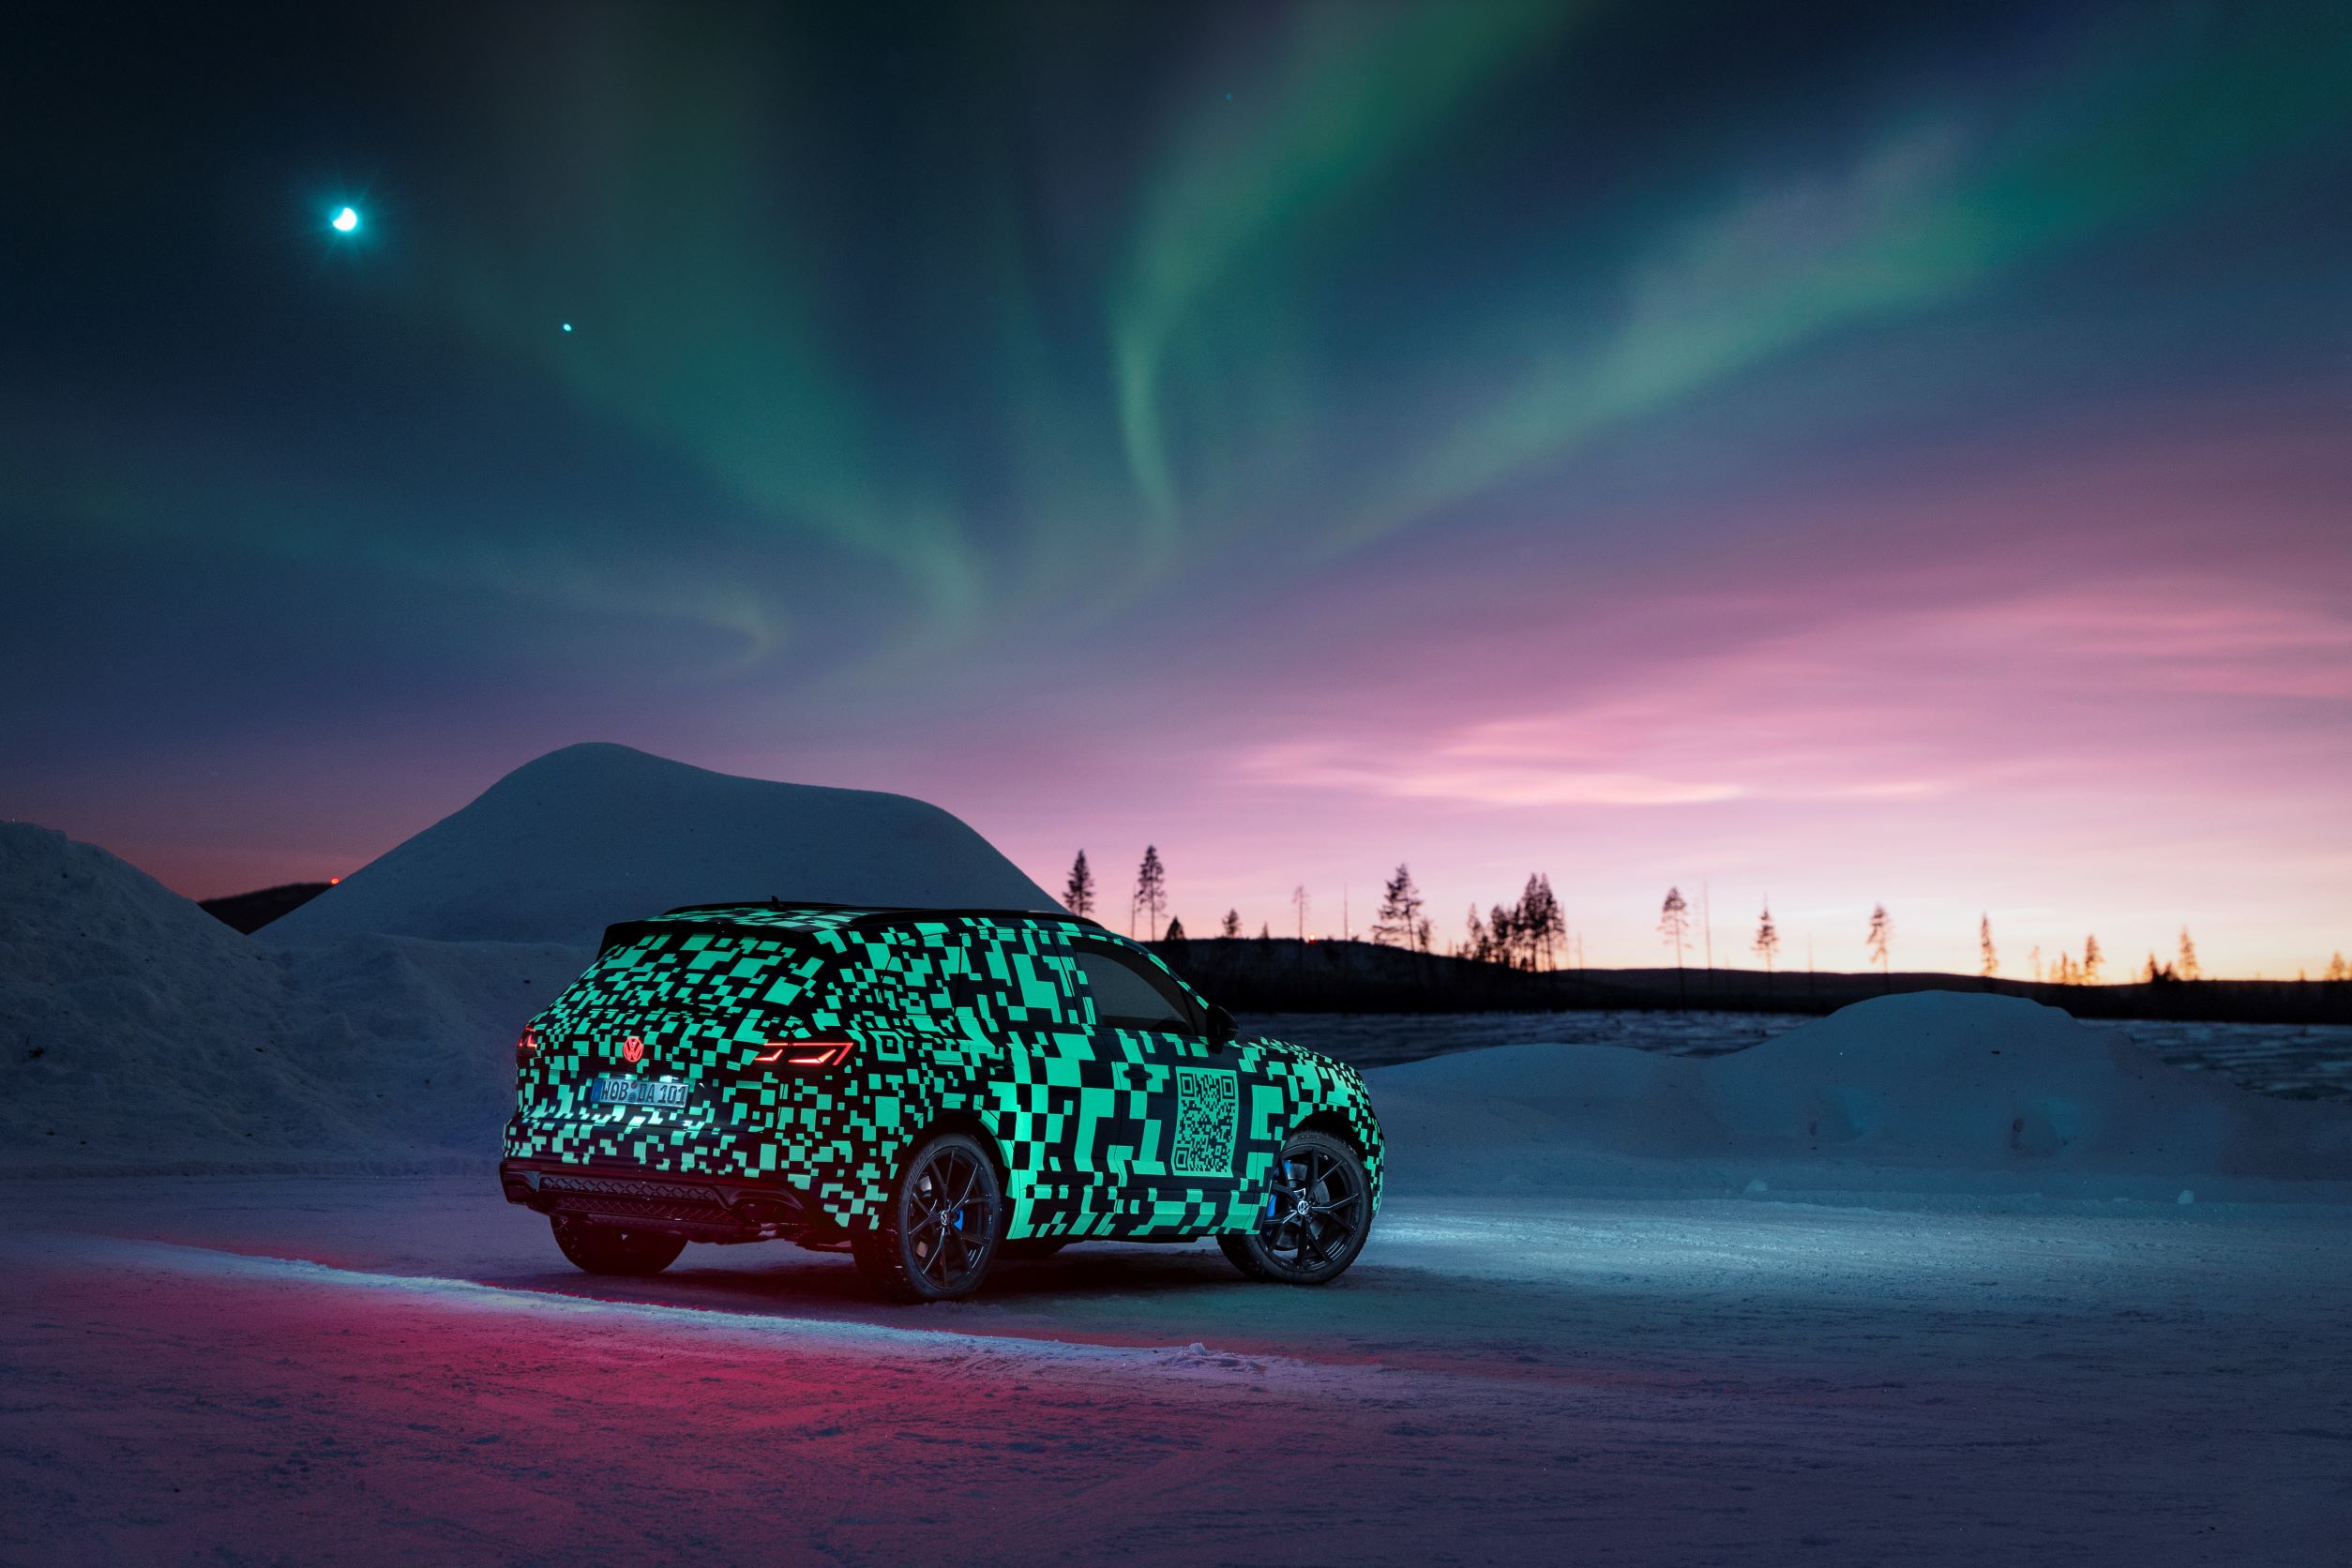 Rear three quarters view of the new Volkswagen Touareg being tested under the Northern Lights in Sweden.